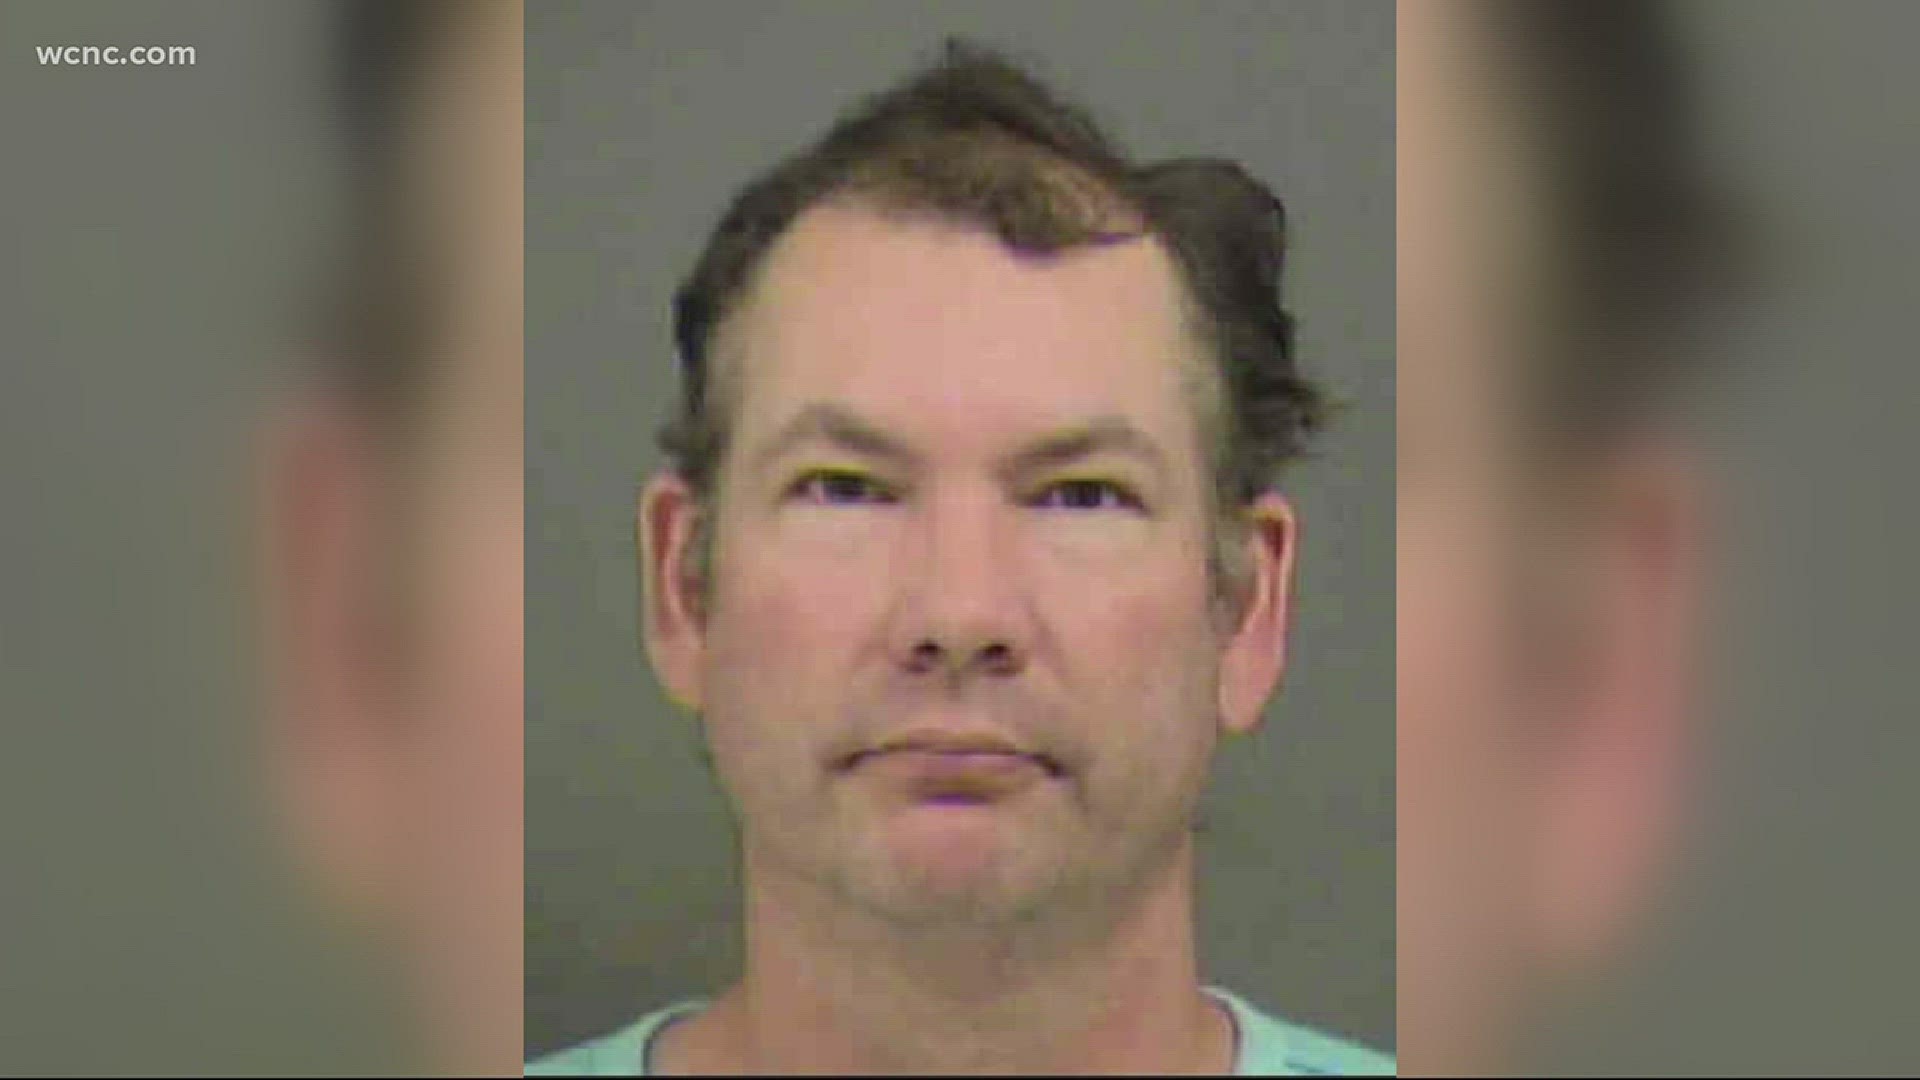 Police say they've arrested a man who targeted women by shooting video up their skirts.